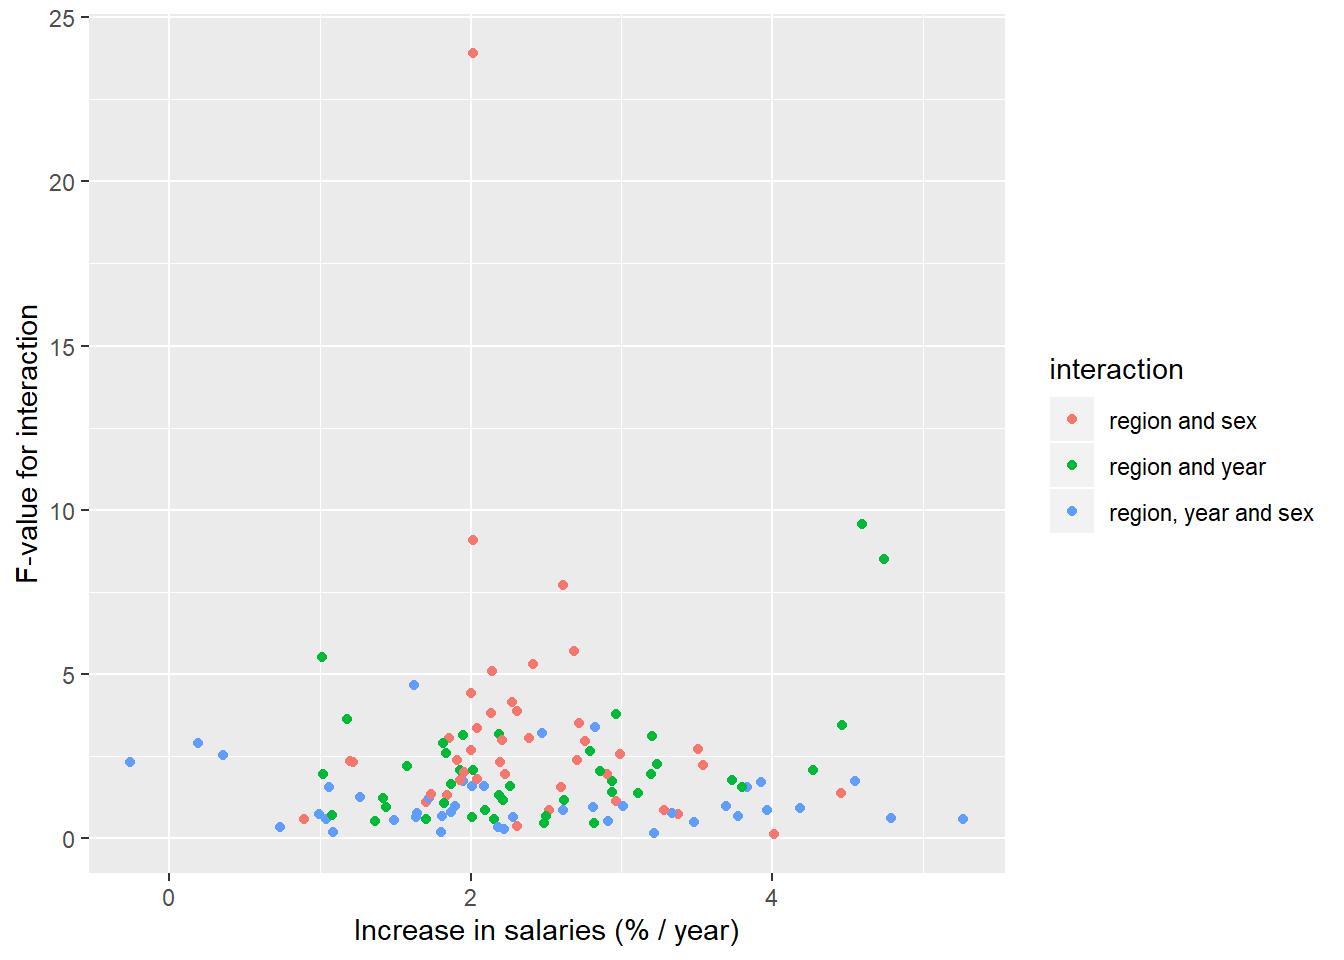 The significance of the interaction between region, year and sex on the salary in Sweden, a comparison between different occupational groups, Year 2014 - 2018